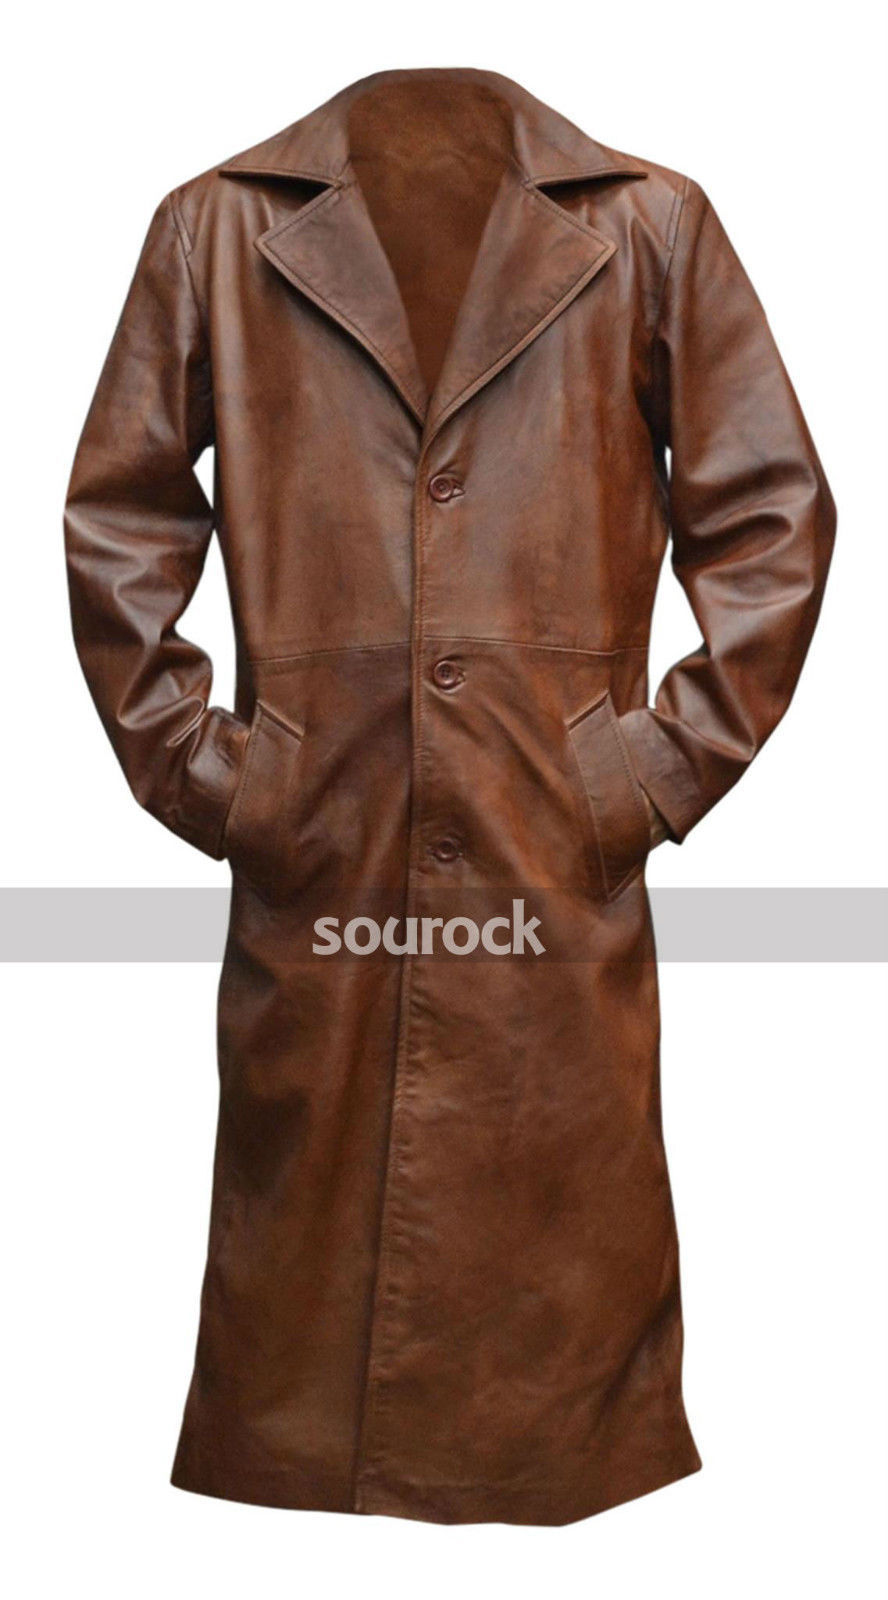 Dawn of Justice Nightmare Batman V Superman Trench Coat Brown Leather Jacket